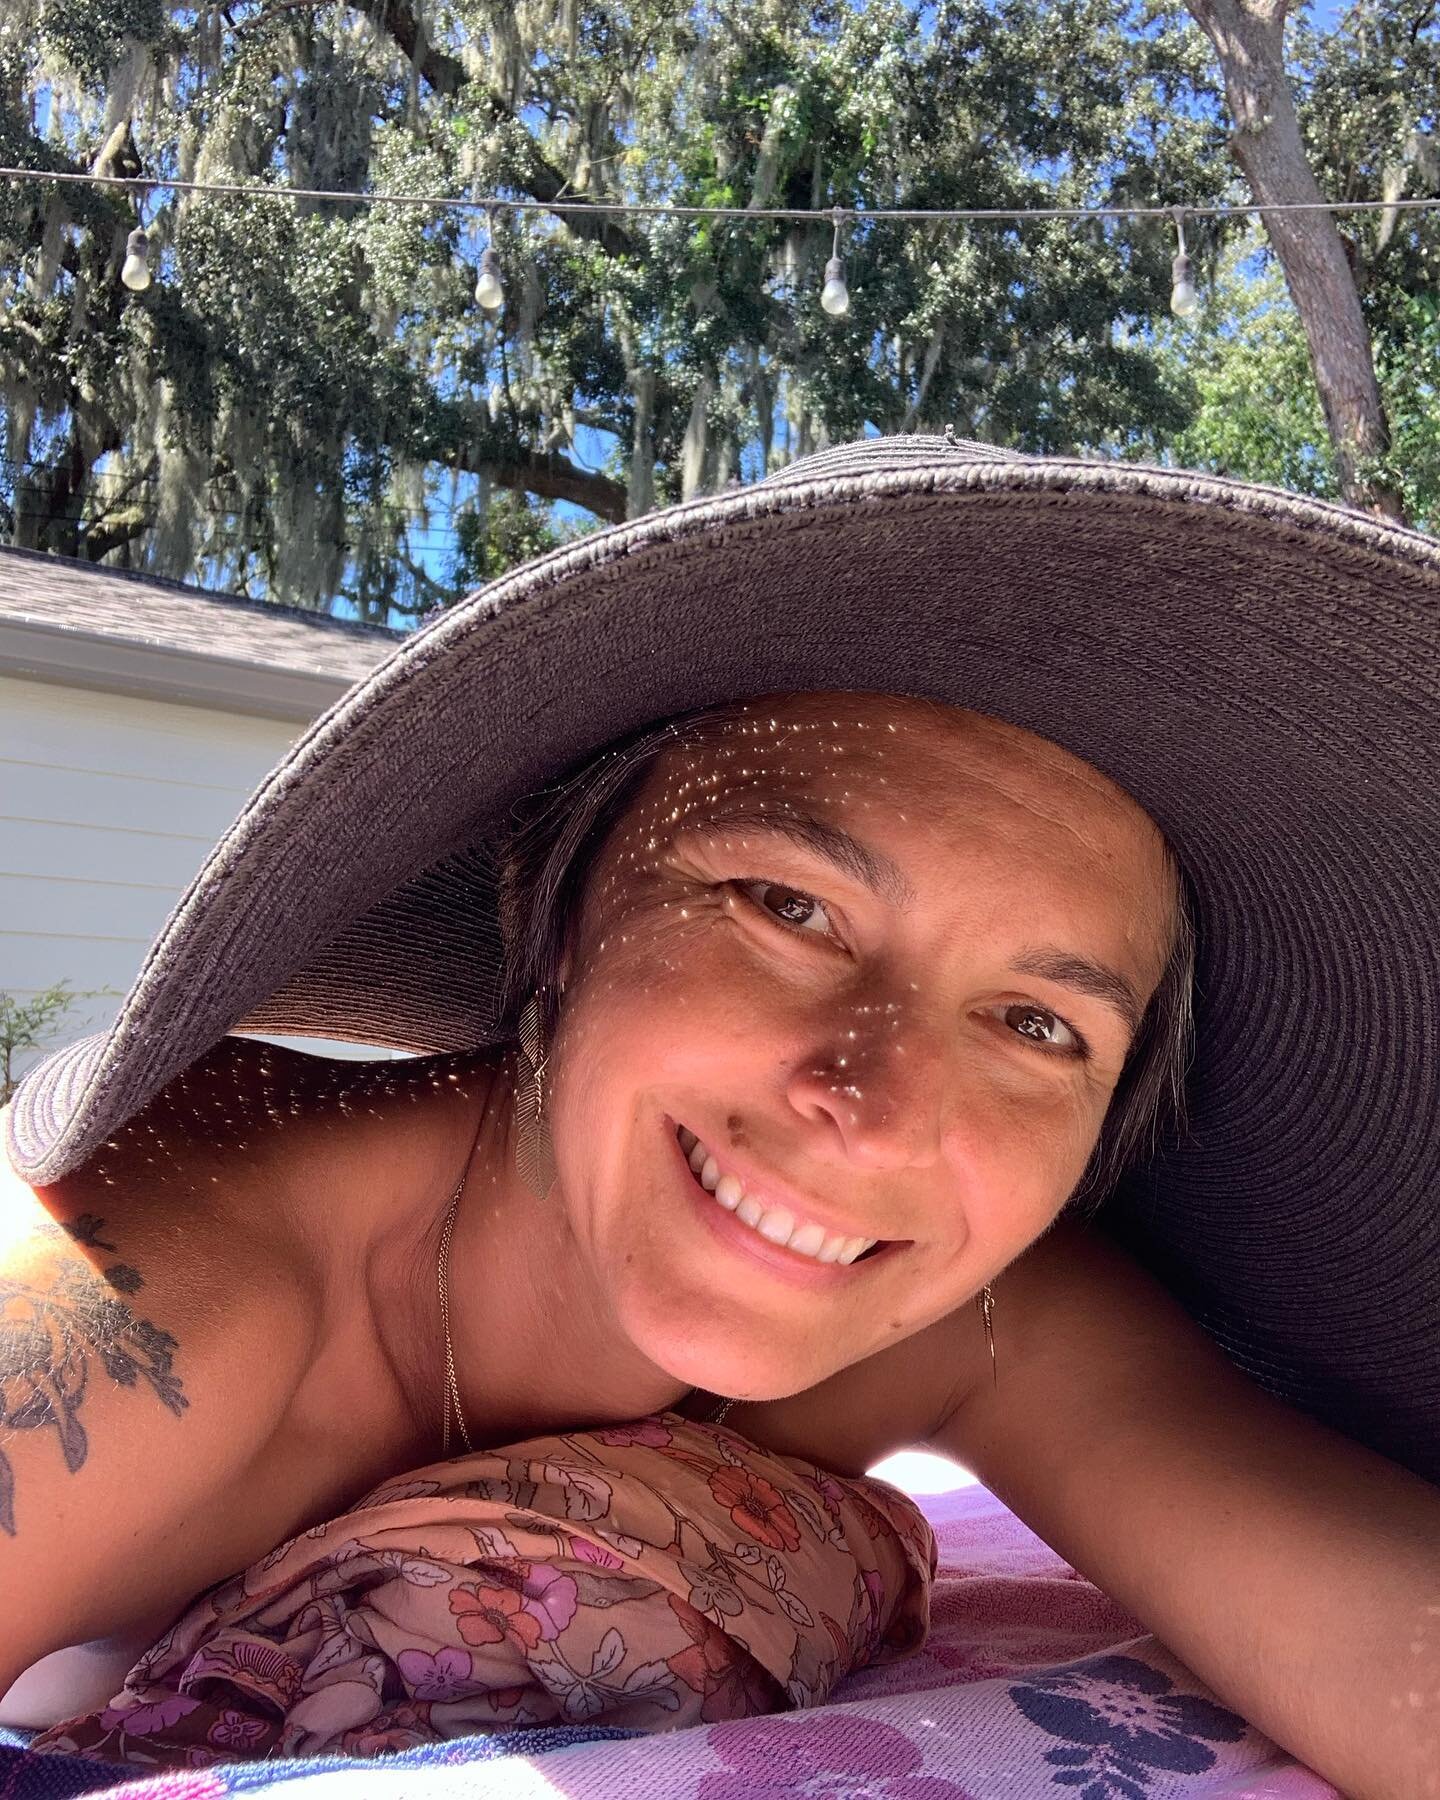 Sunbathing!!!

Controversial subject in 2023&hellip;even though most Americans are seriously deficient in exposure to natural light &amp; Vitamin D.

Do not misunderstand my advocacy for sunscreen free sun exposure.

***Allowing your skin to burn is 